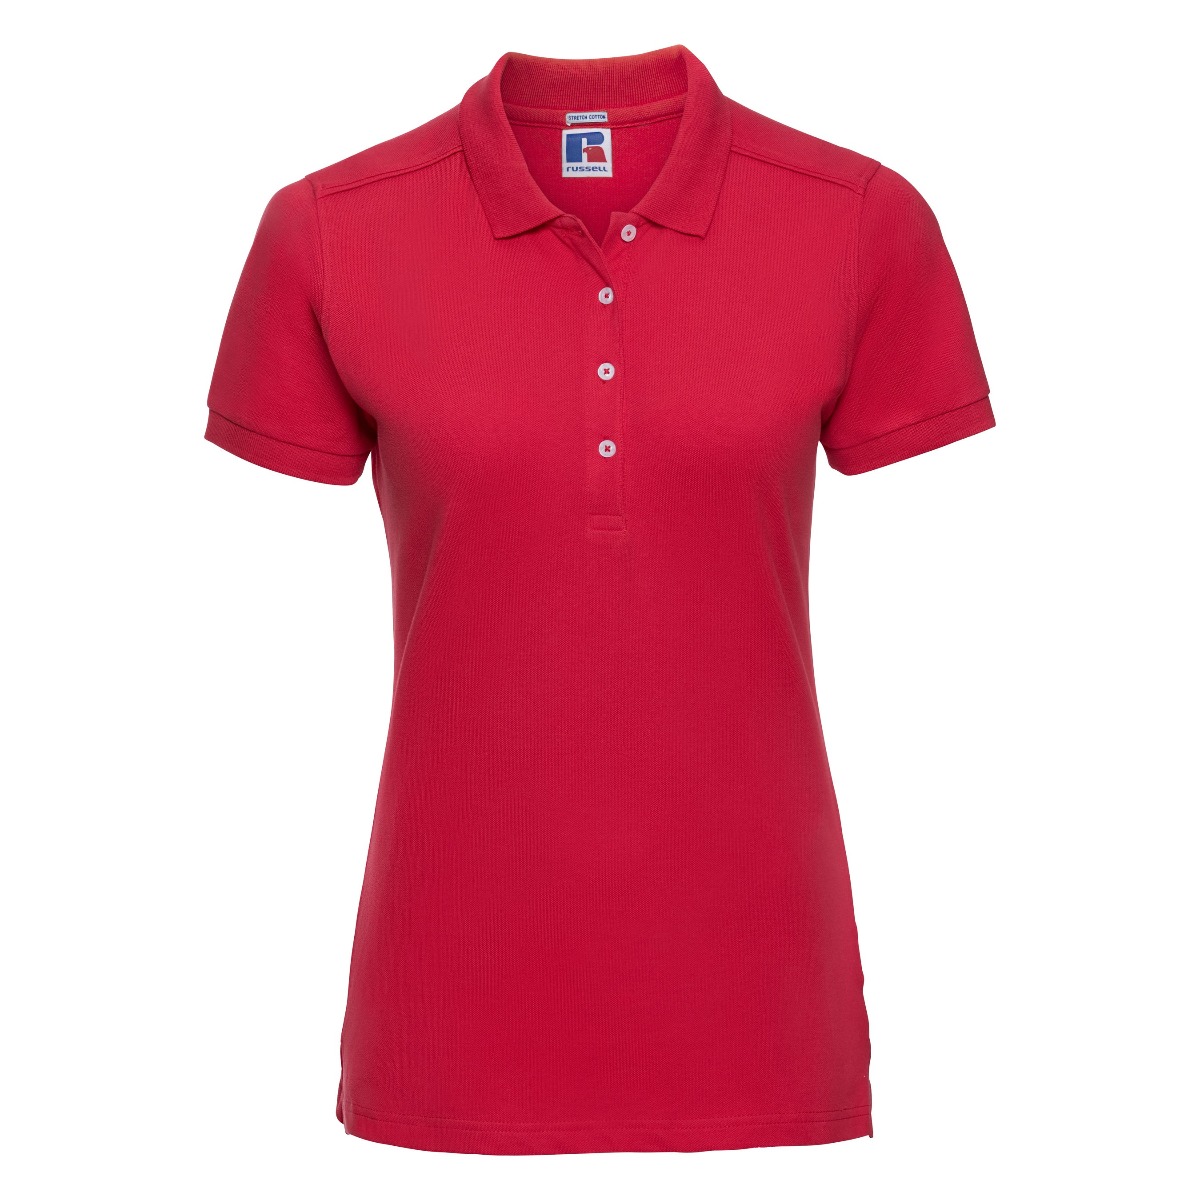 ax-httpswebsystems.s3.amazonaws.comtmp_for_downloadrussell-womens-stretch-classic-red_1_1.jpg